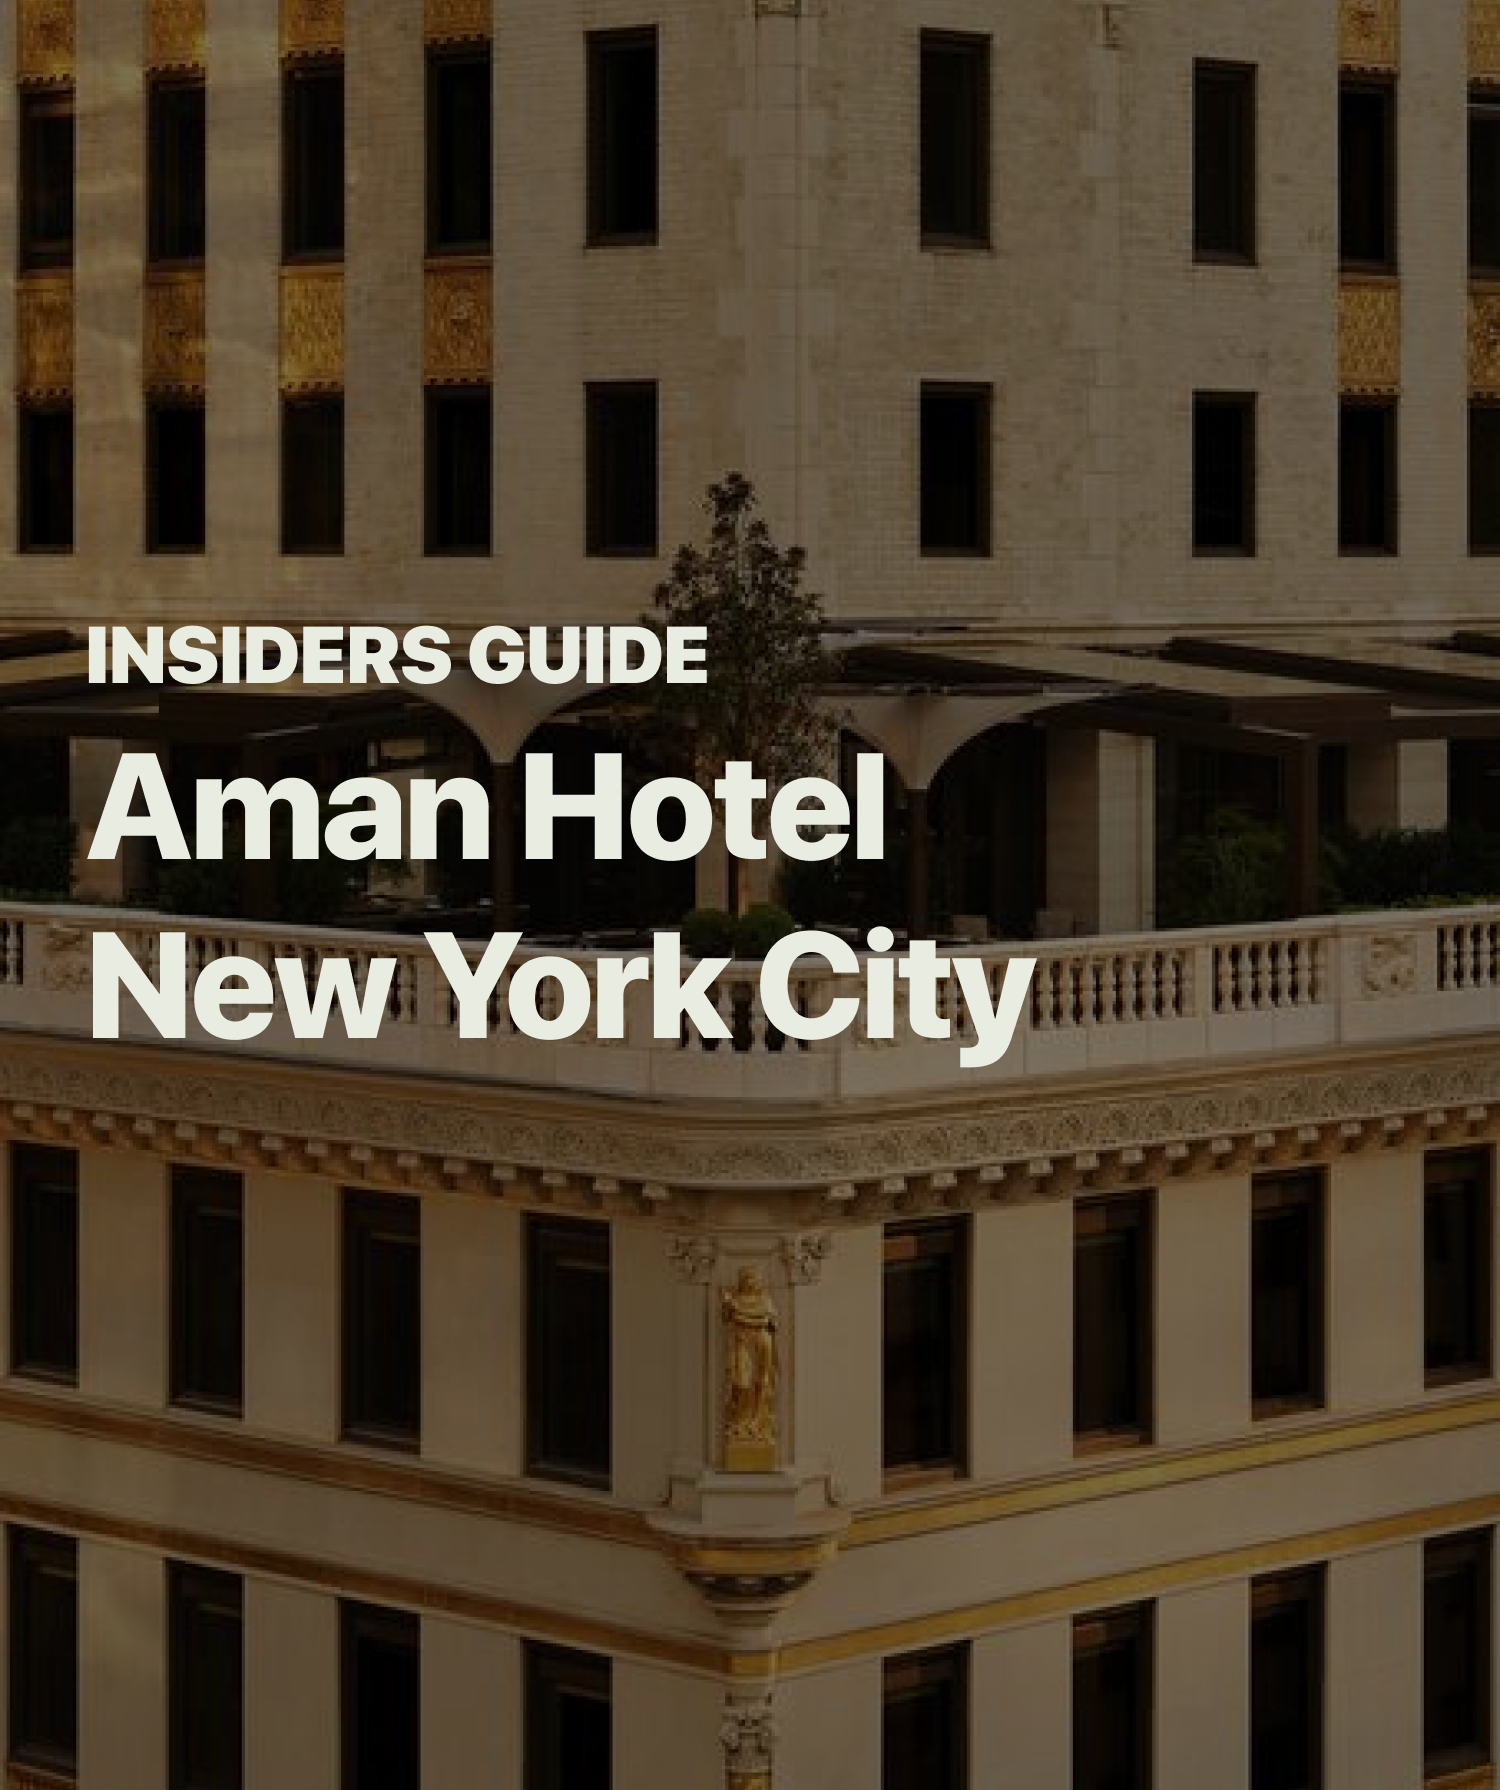 The Aman Hotel New York: Insiders Guide post image